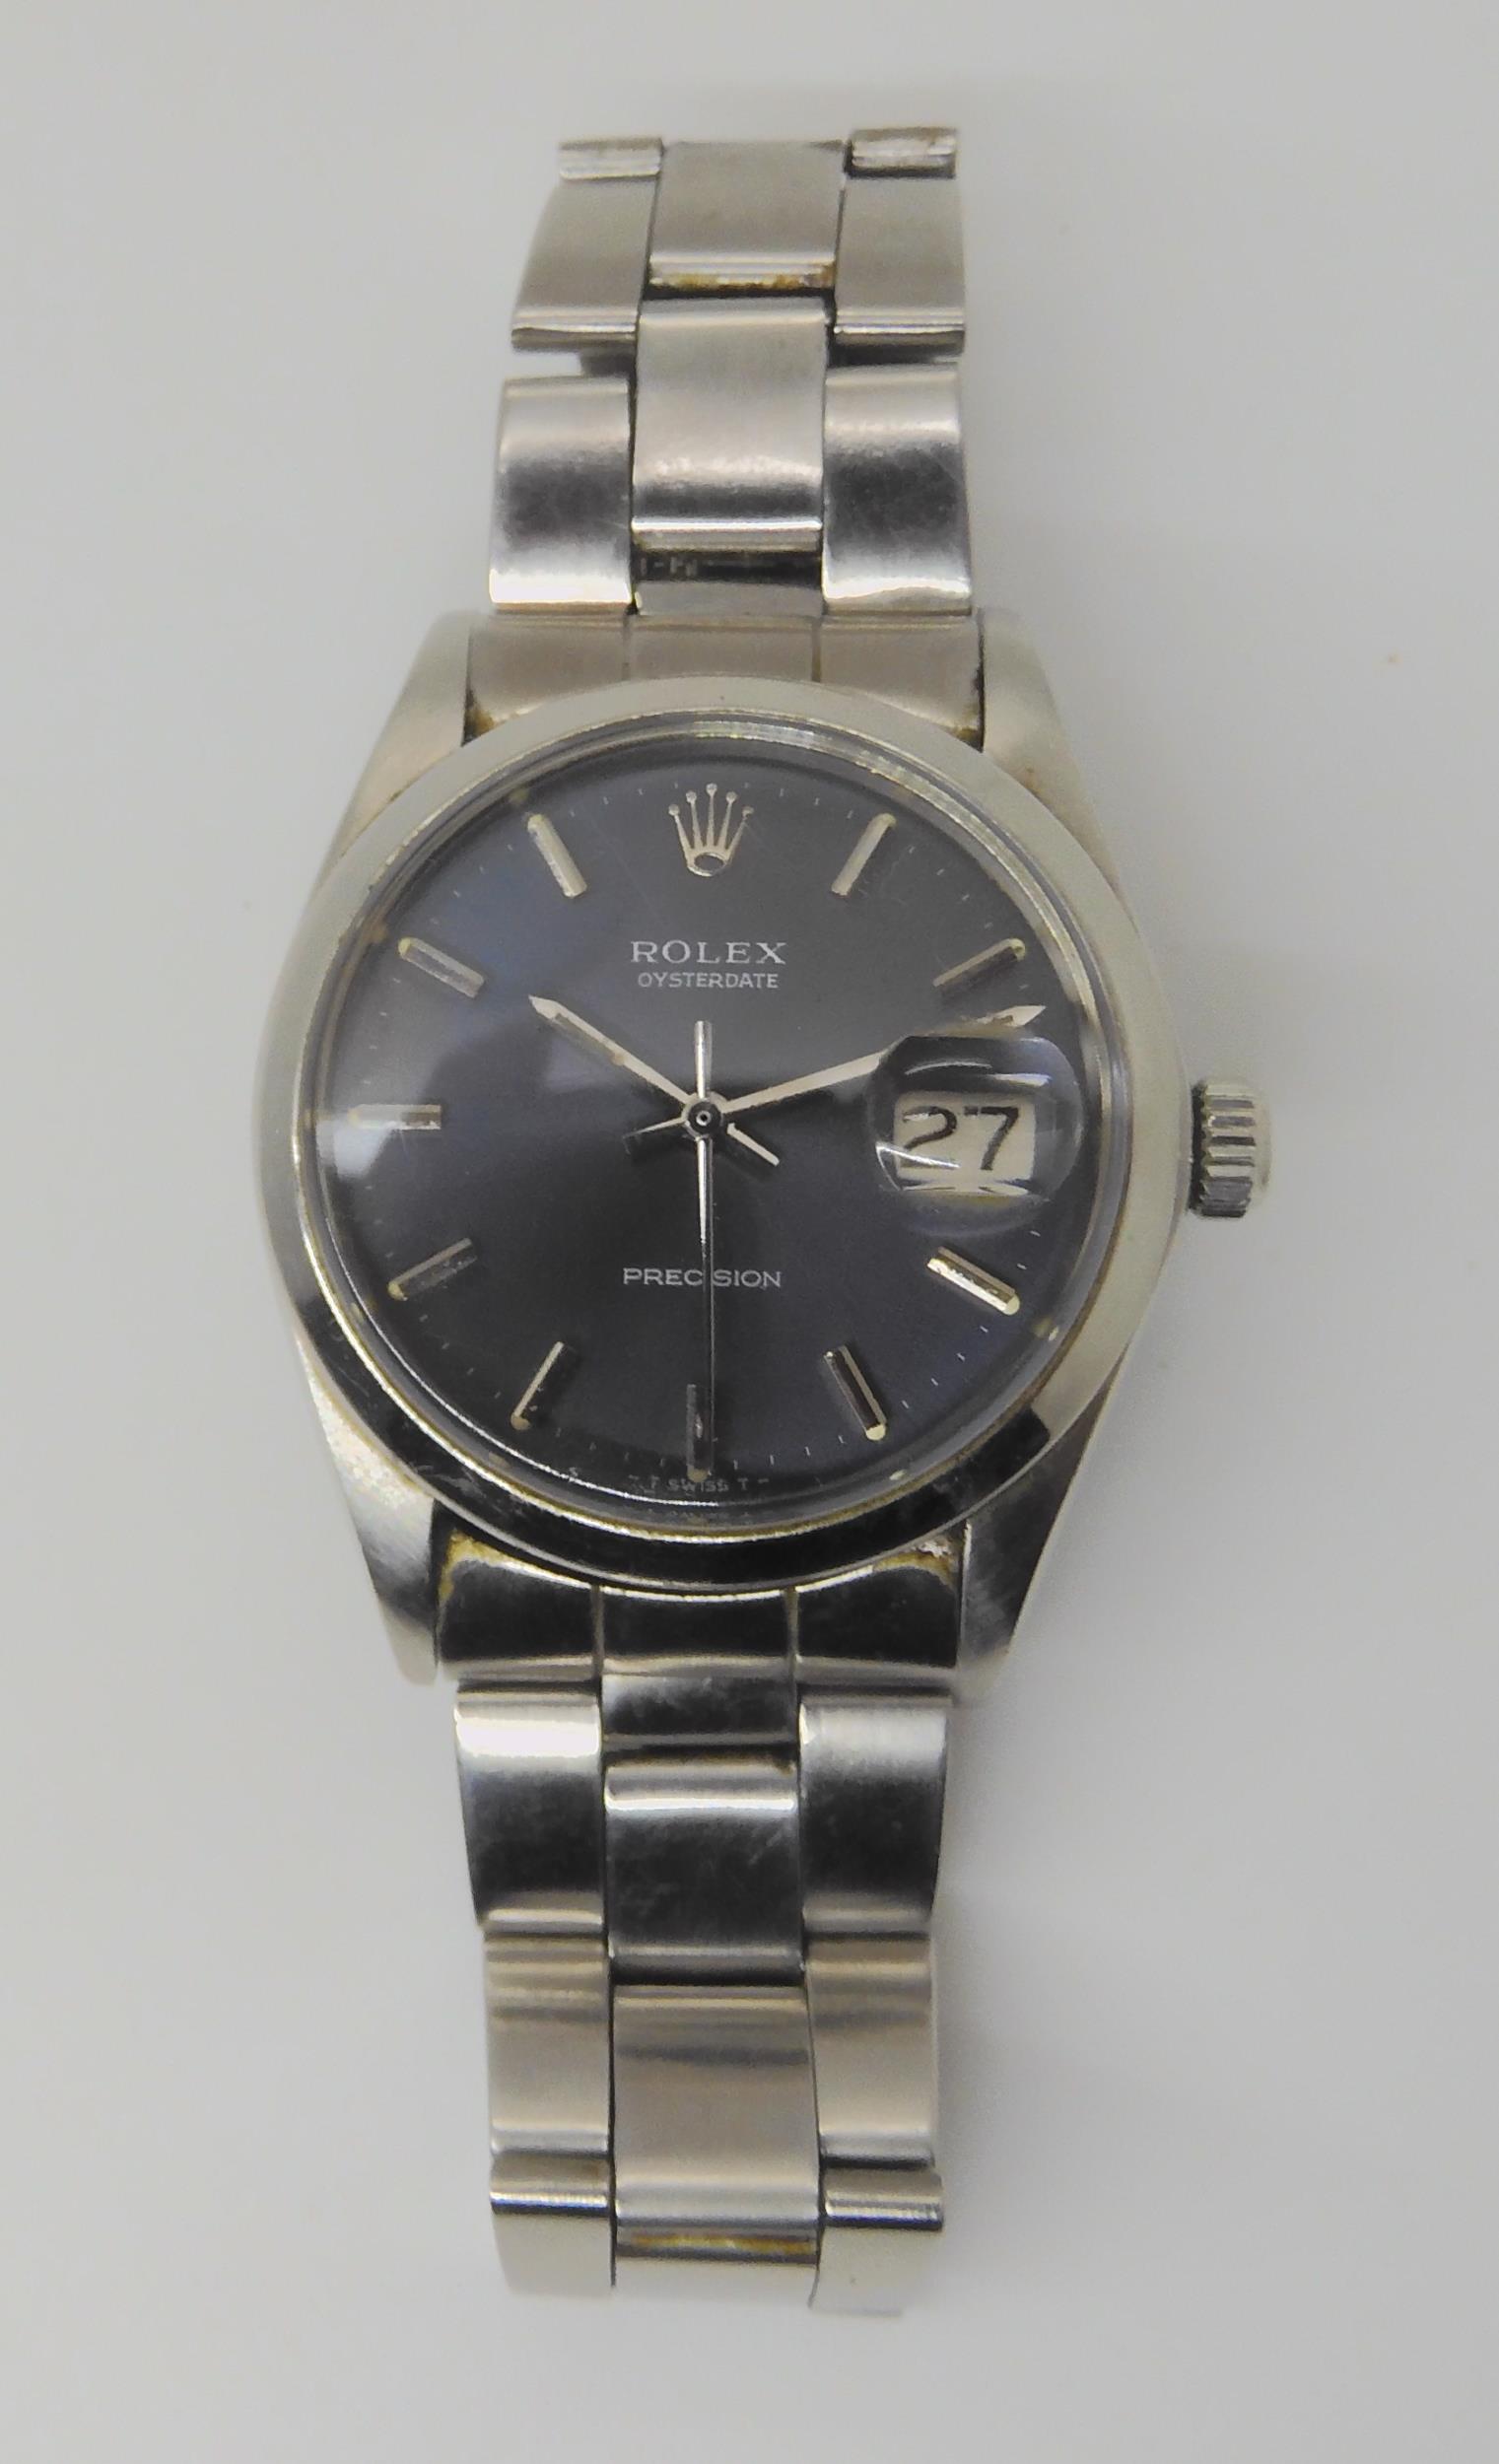 A ROLEX OYSTERDATE PRECISION with dark grey satined dial, silver coloured baton numerals, hands, and